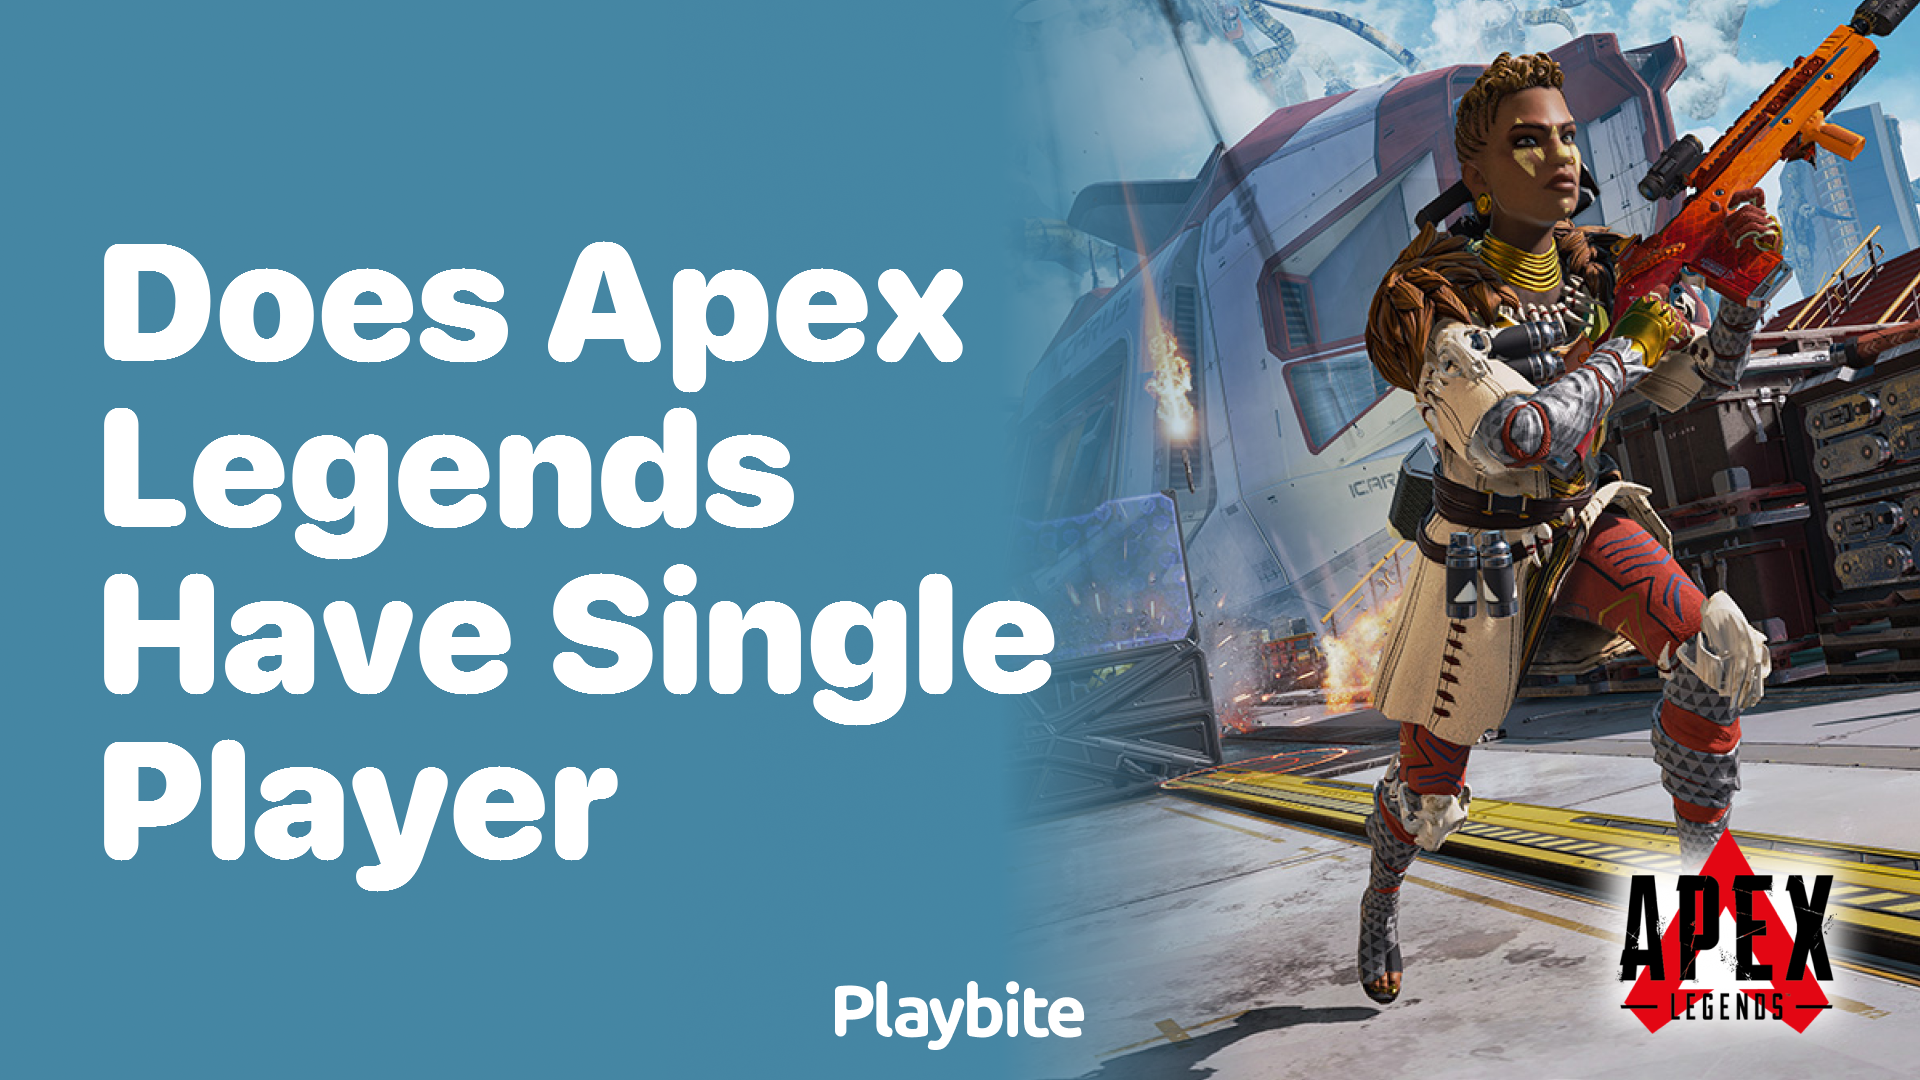 Does Apex Legends Have Single Player?